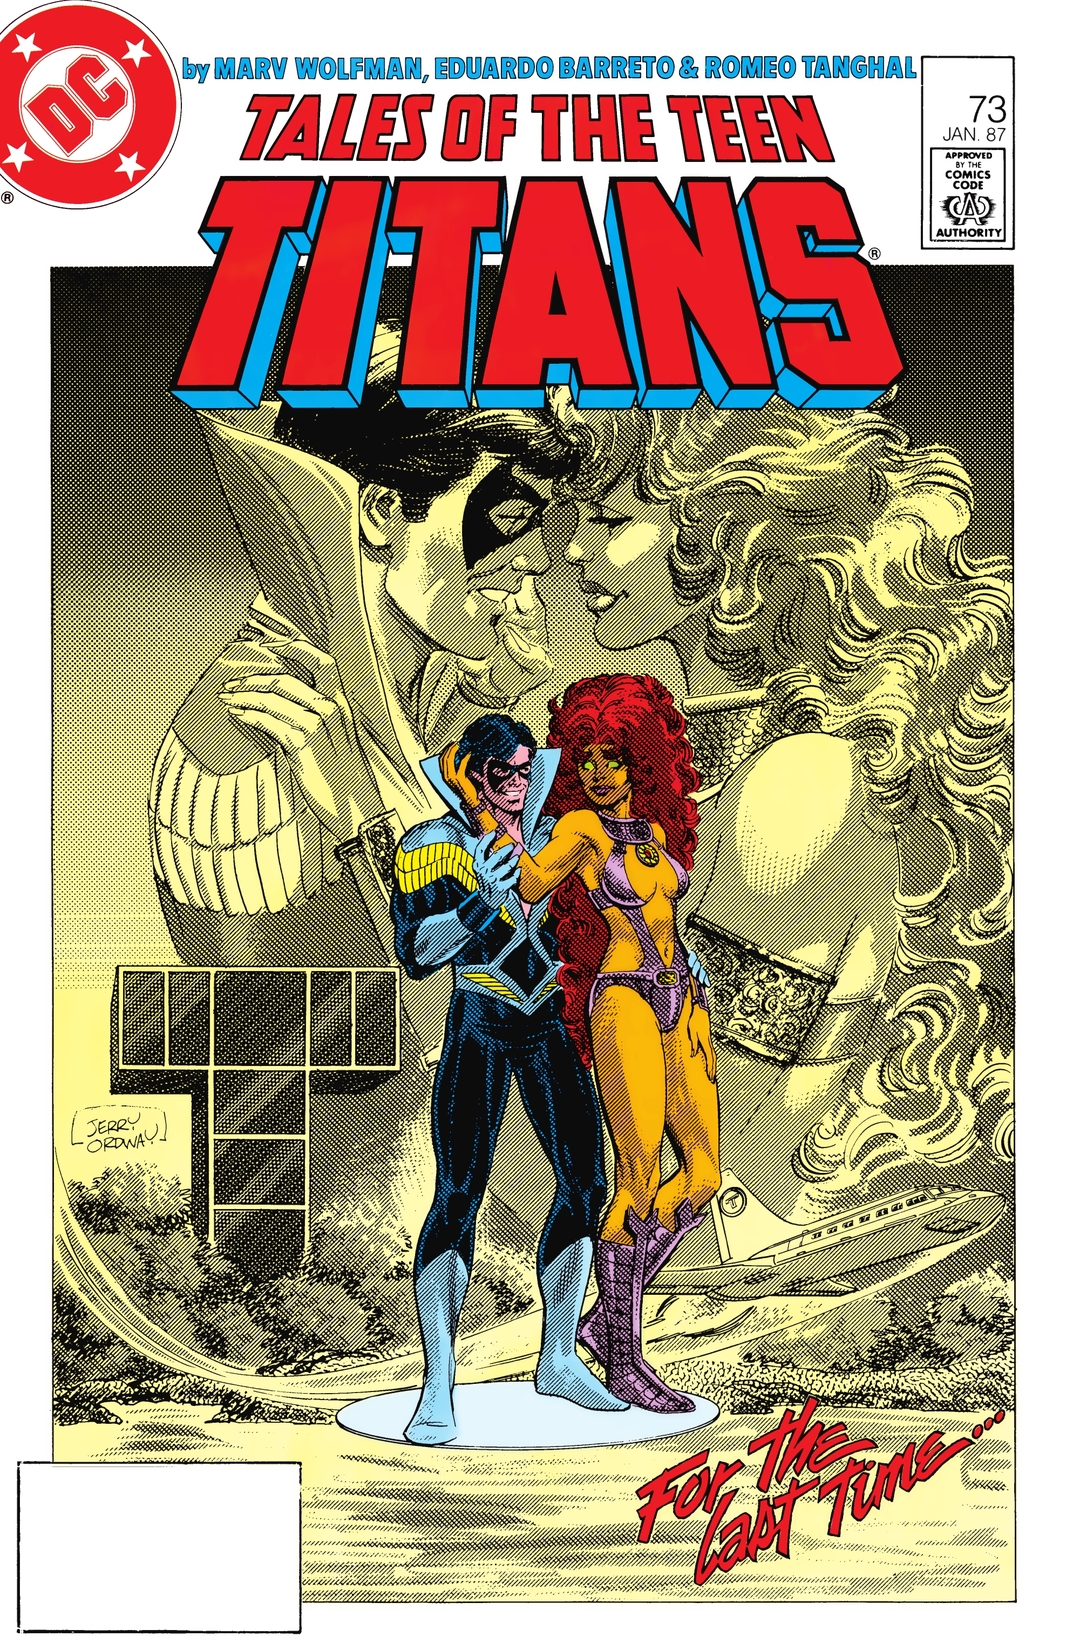 Tales of the Teen Titans #73 preview images